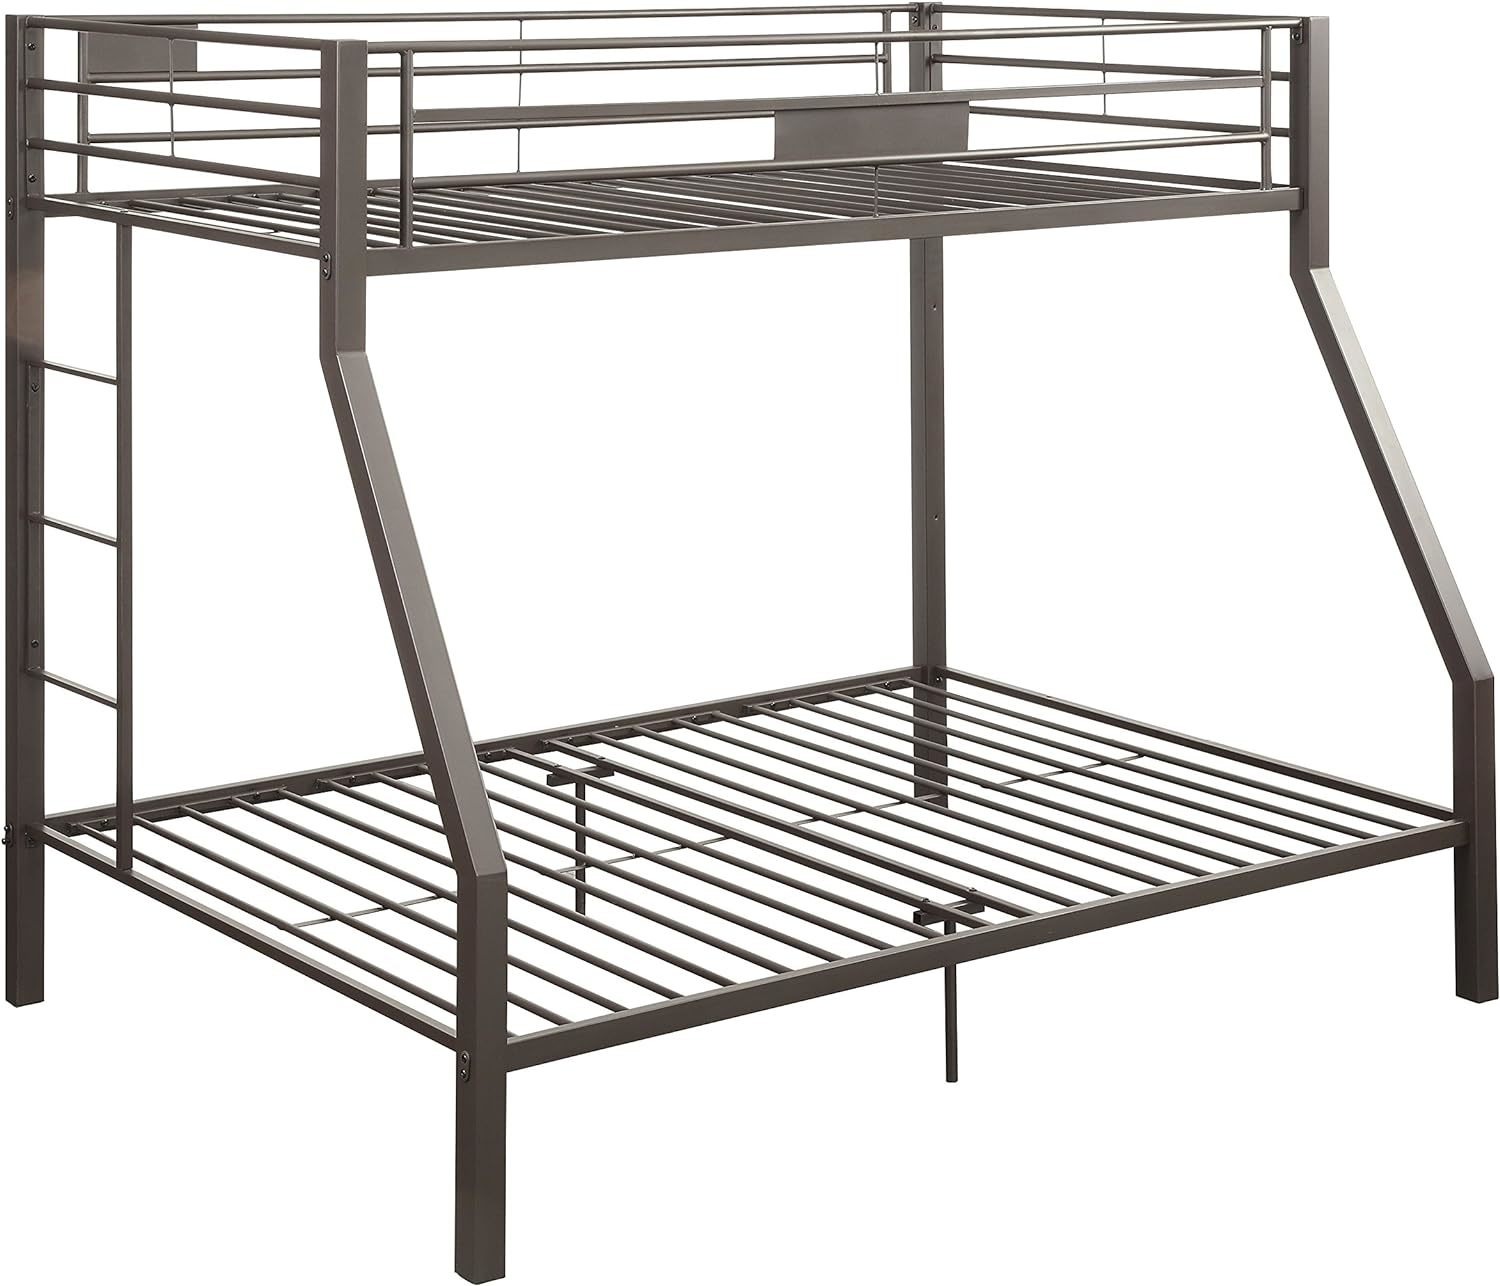 Twin Over Full Bunk Bed In Acme Limbra Brown. - $485.95